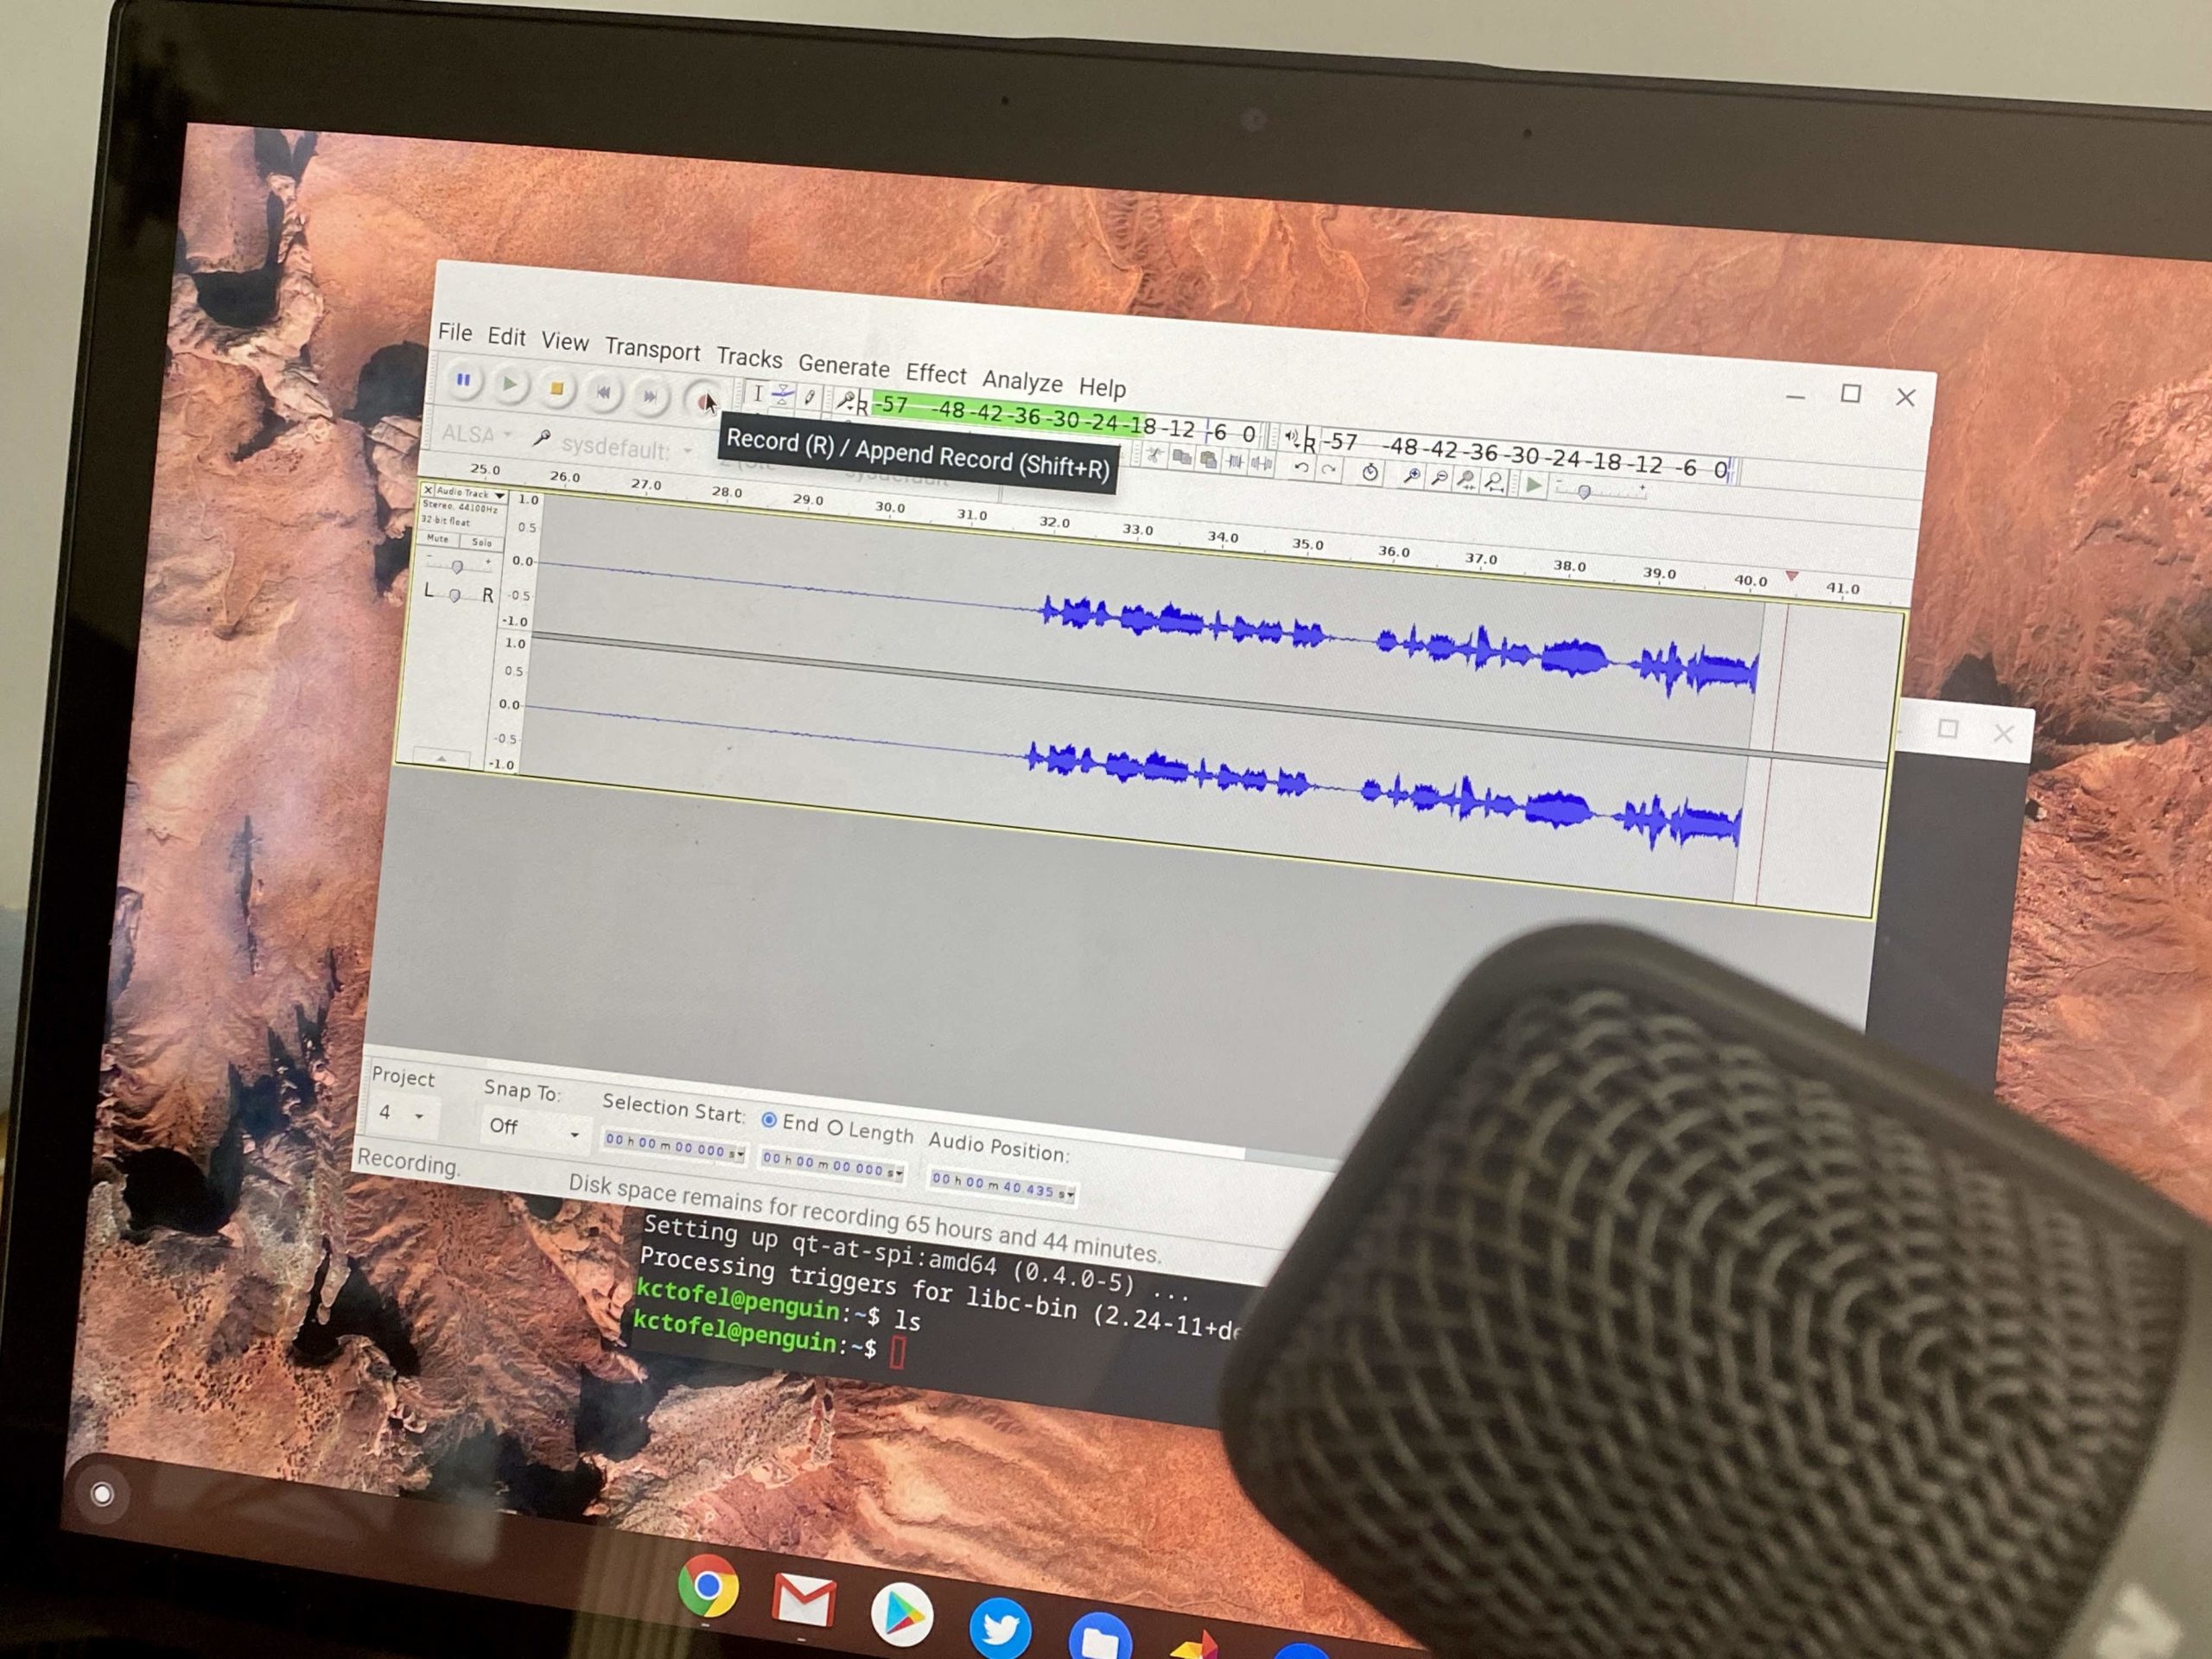 Microphone audio capture arrives in Linux on Chromebooks. Here’s how to use it